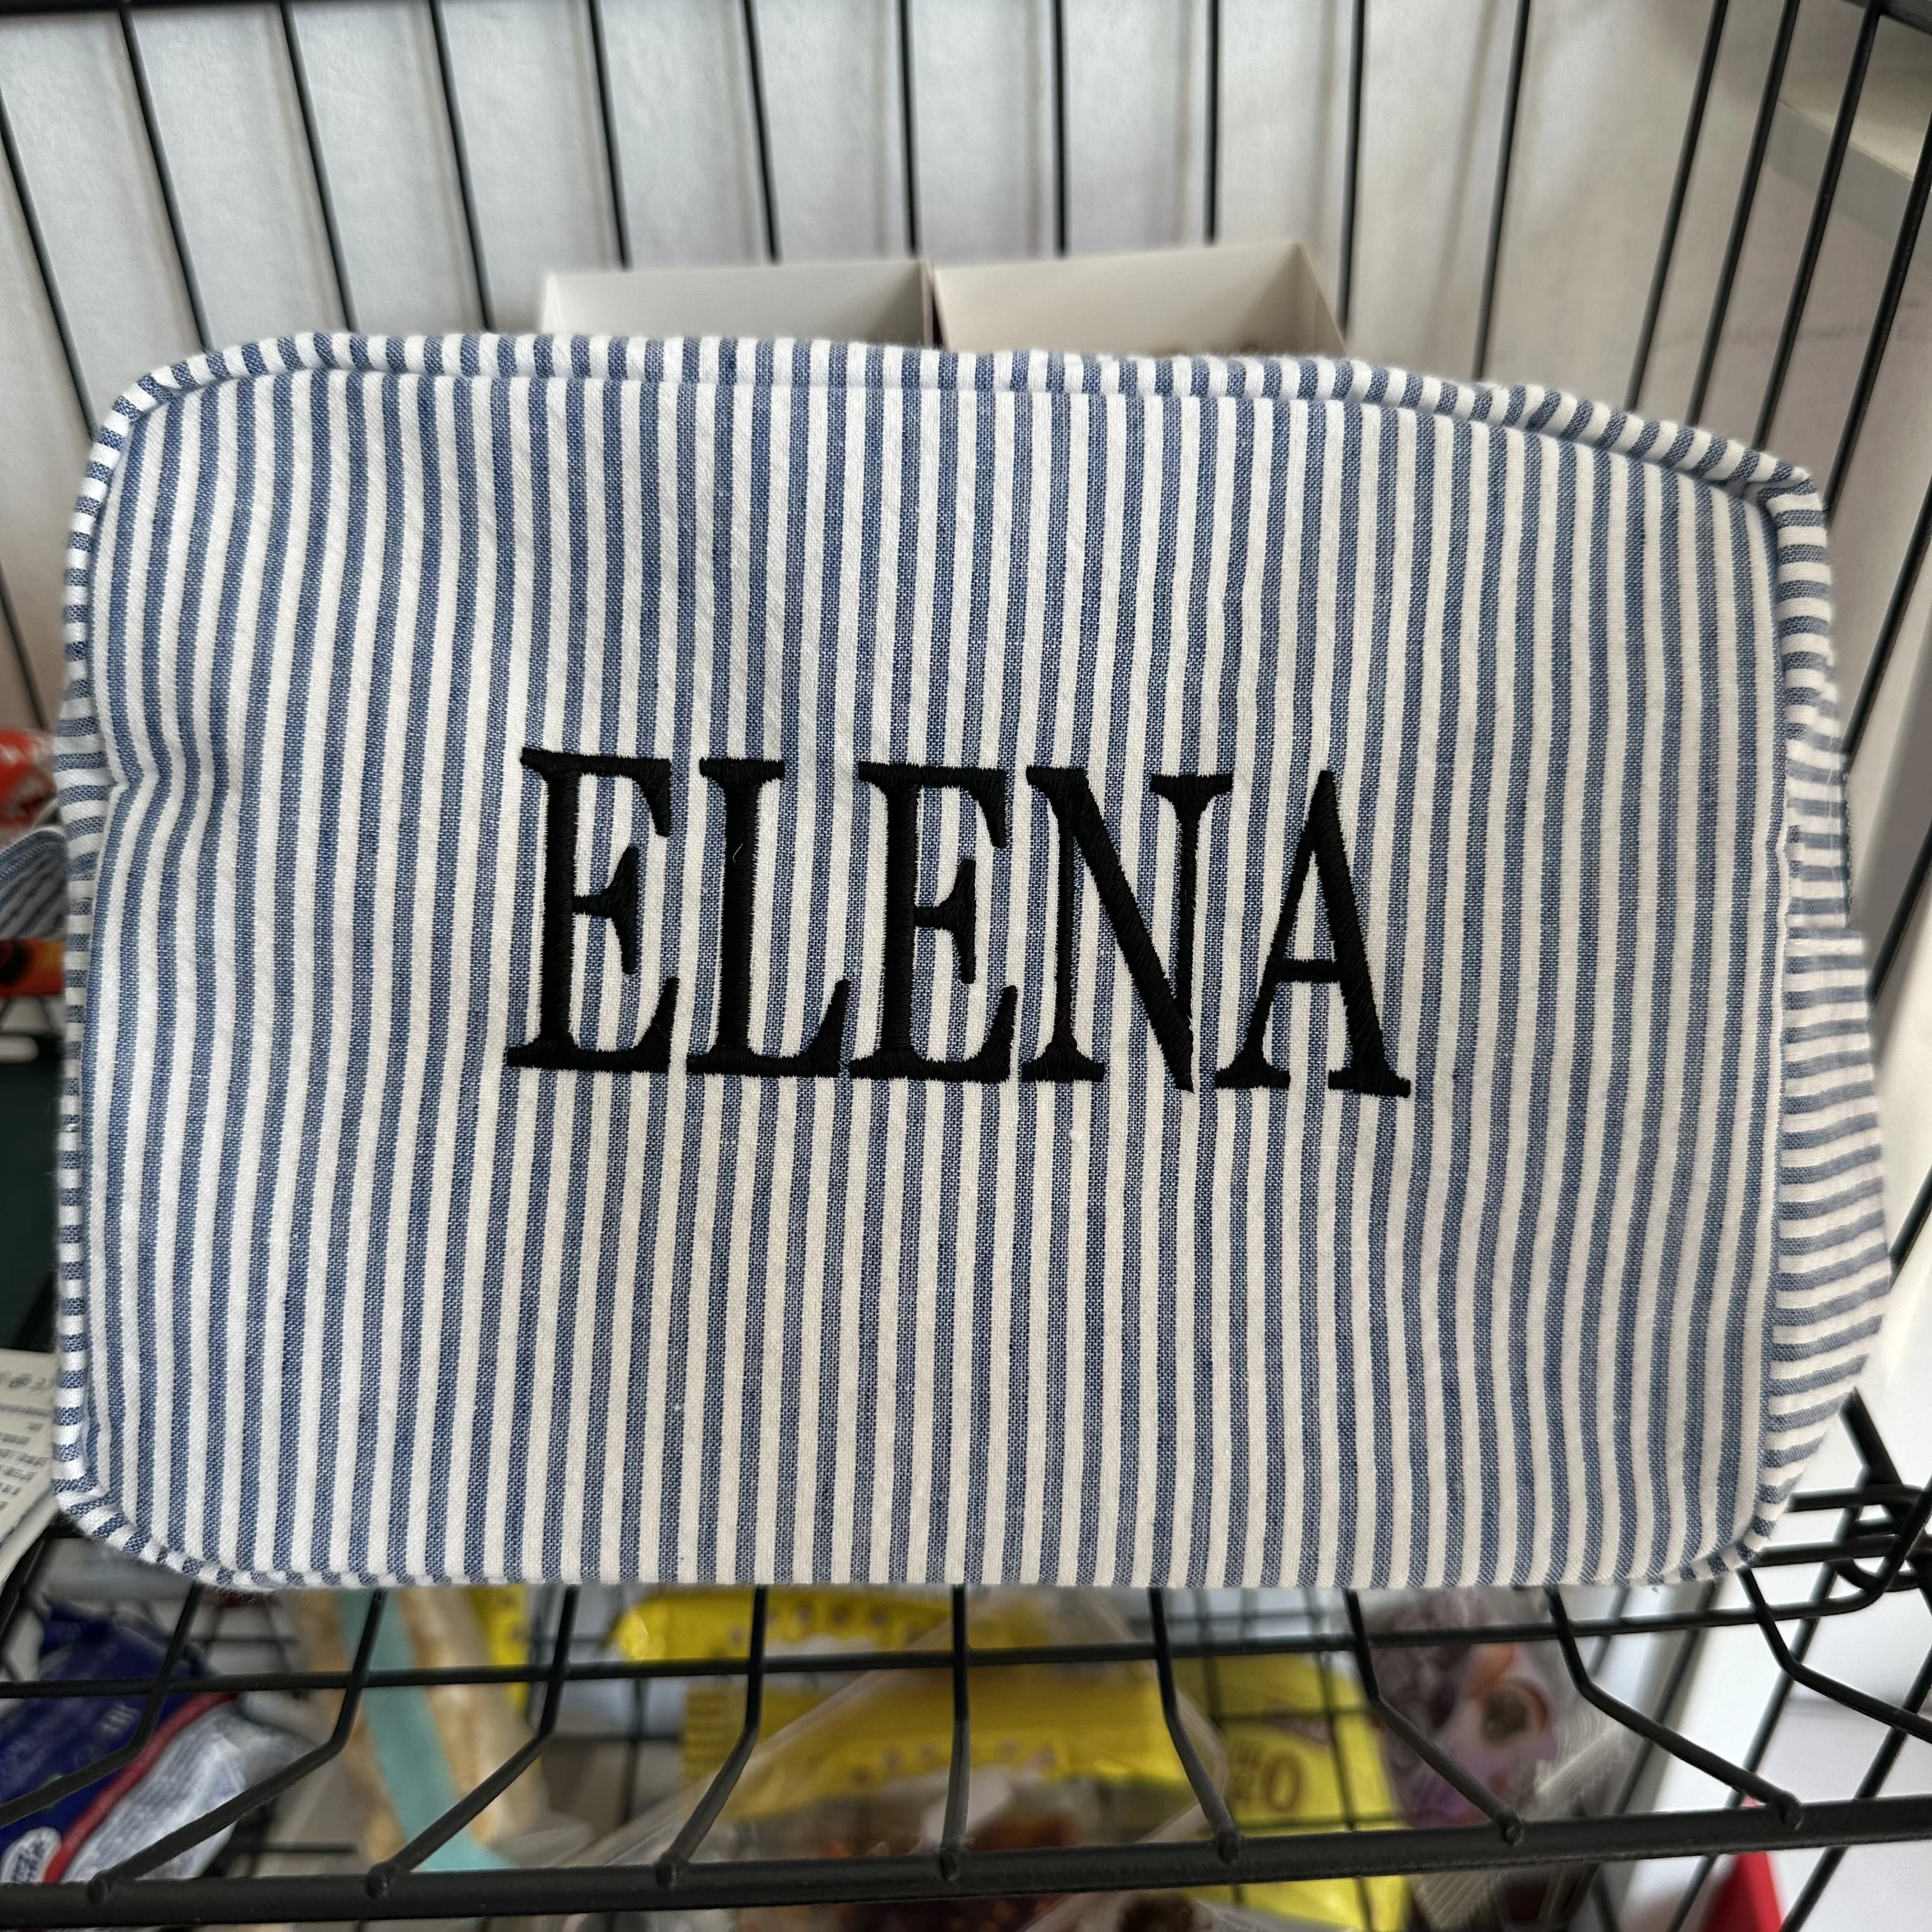 

Custom Striped Makeup Bag for Travelling Personalized Name Women's Portable Toiletry Bag Embroidery Name Makeup Storage Bags